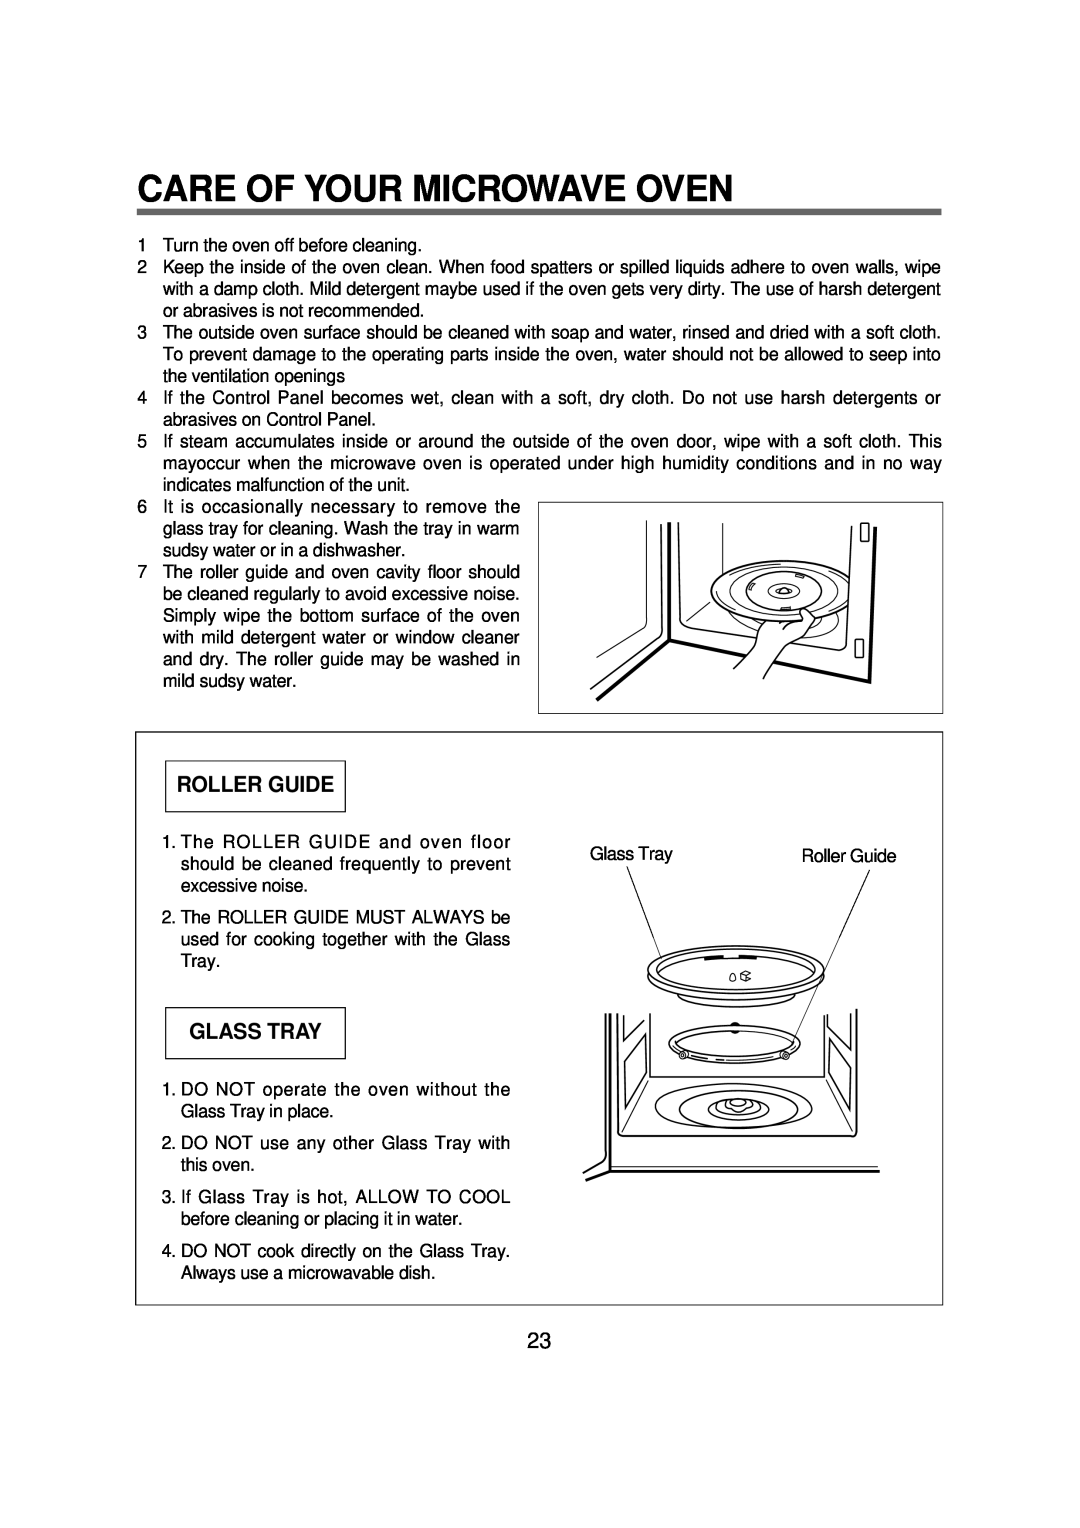 Magic Chef MCD1611B manual Care Of Your Microwave Oven, Roller Guide, Glass Tray 